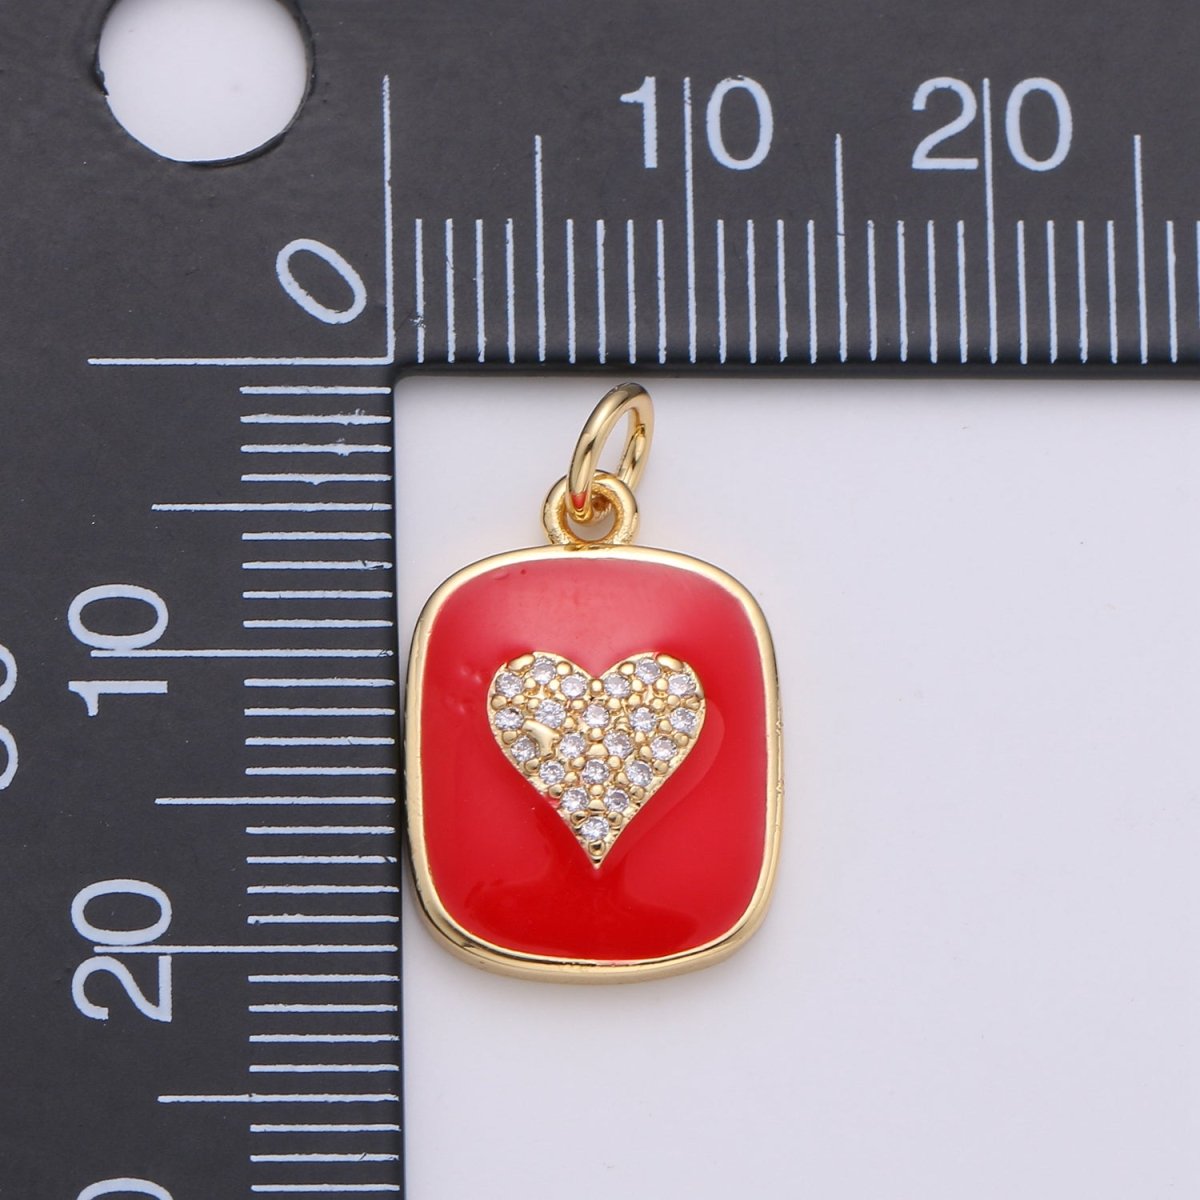 24K Gold Filled Dainty Heart Enamel Charm in Black, White, Red or Pink with Micro Pave Cubic Zirconia CZ Stone for Necklace or Bracelet |OLD- C-866, C-867 - DLUXCA